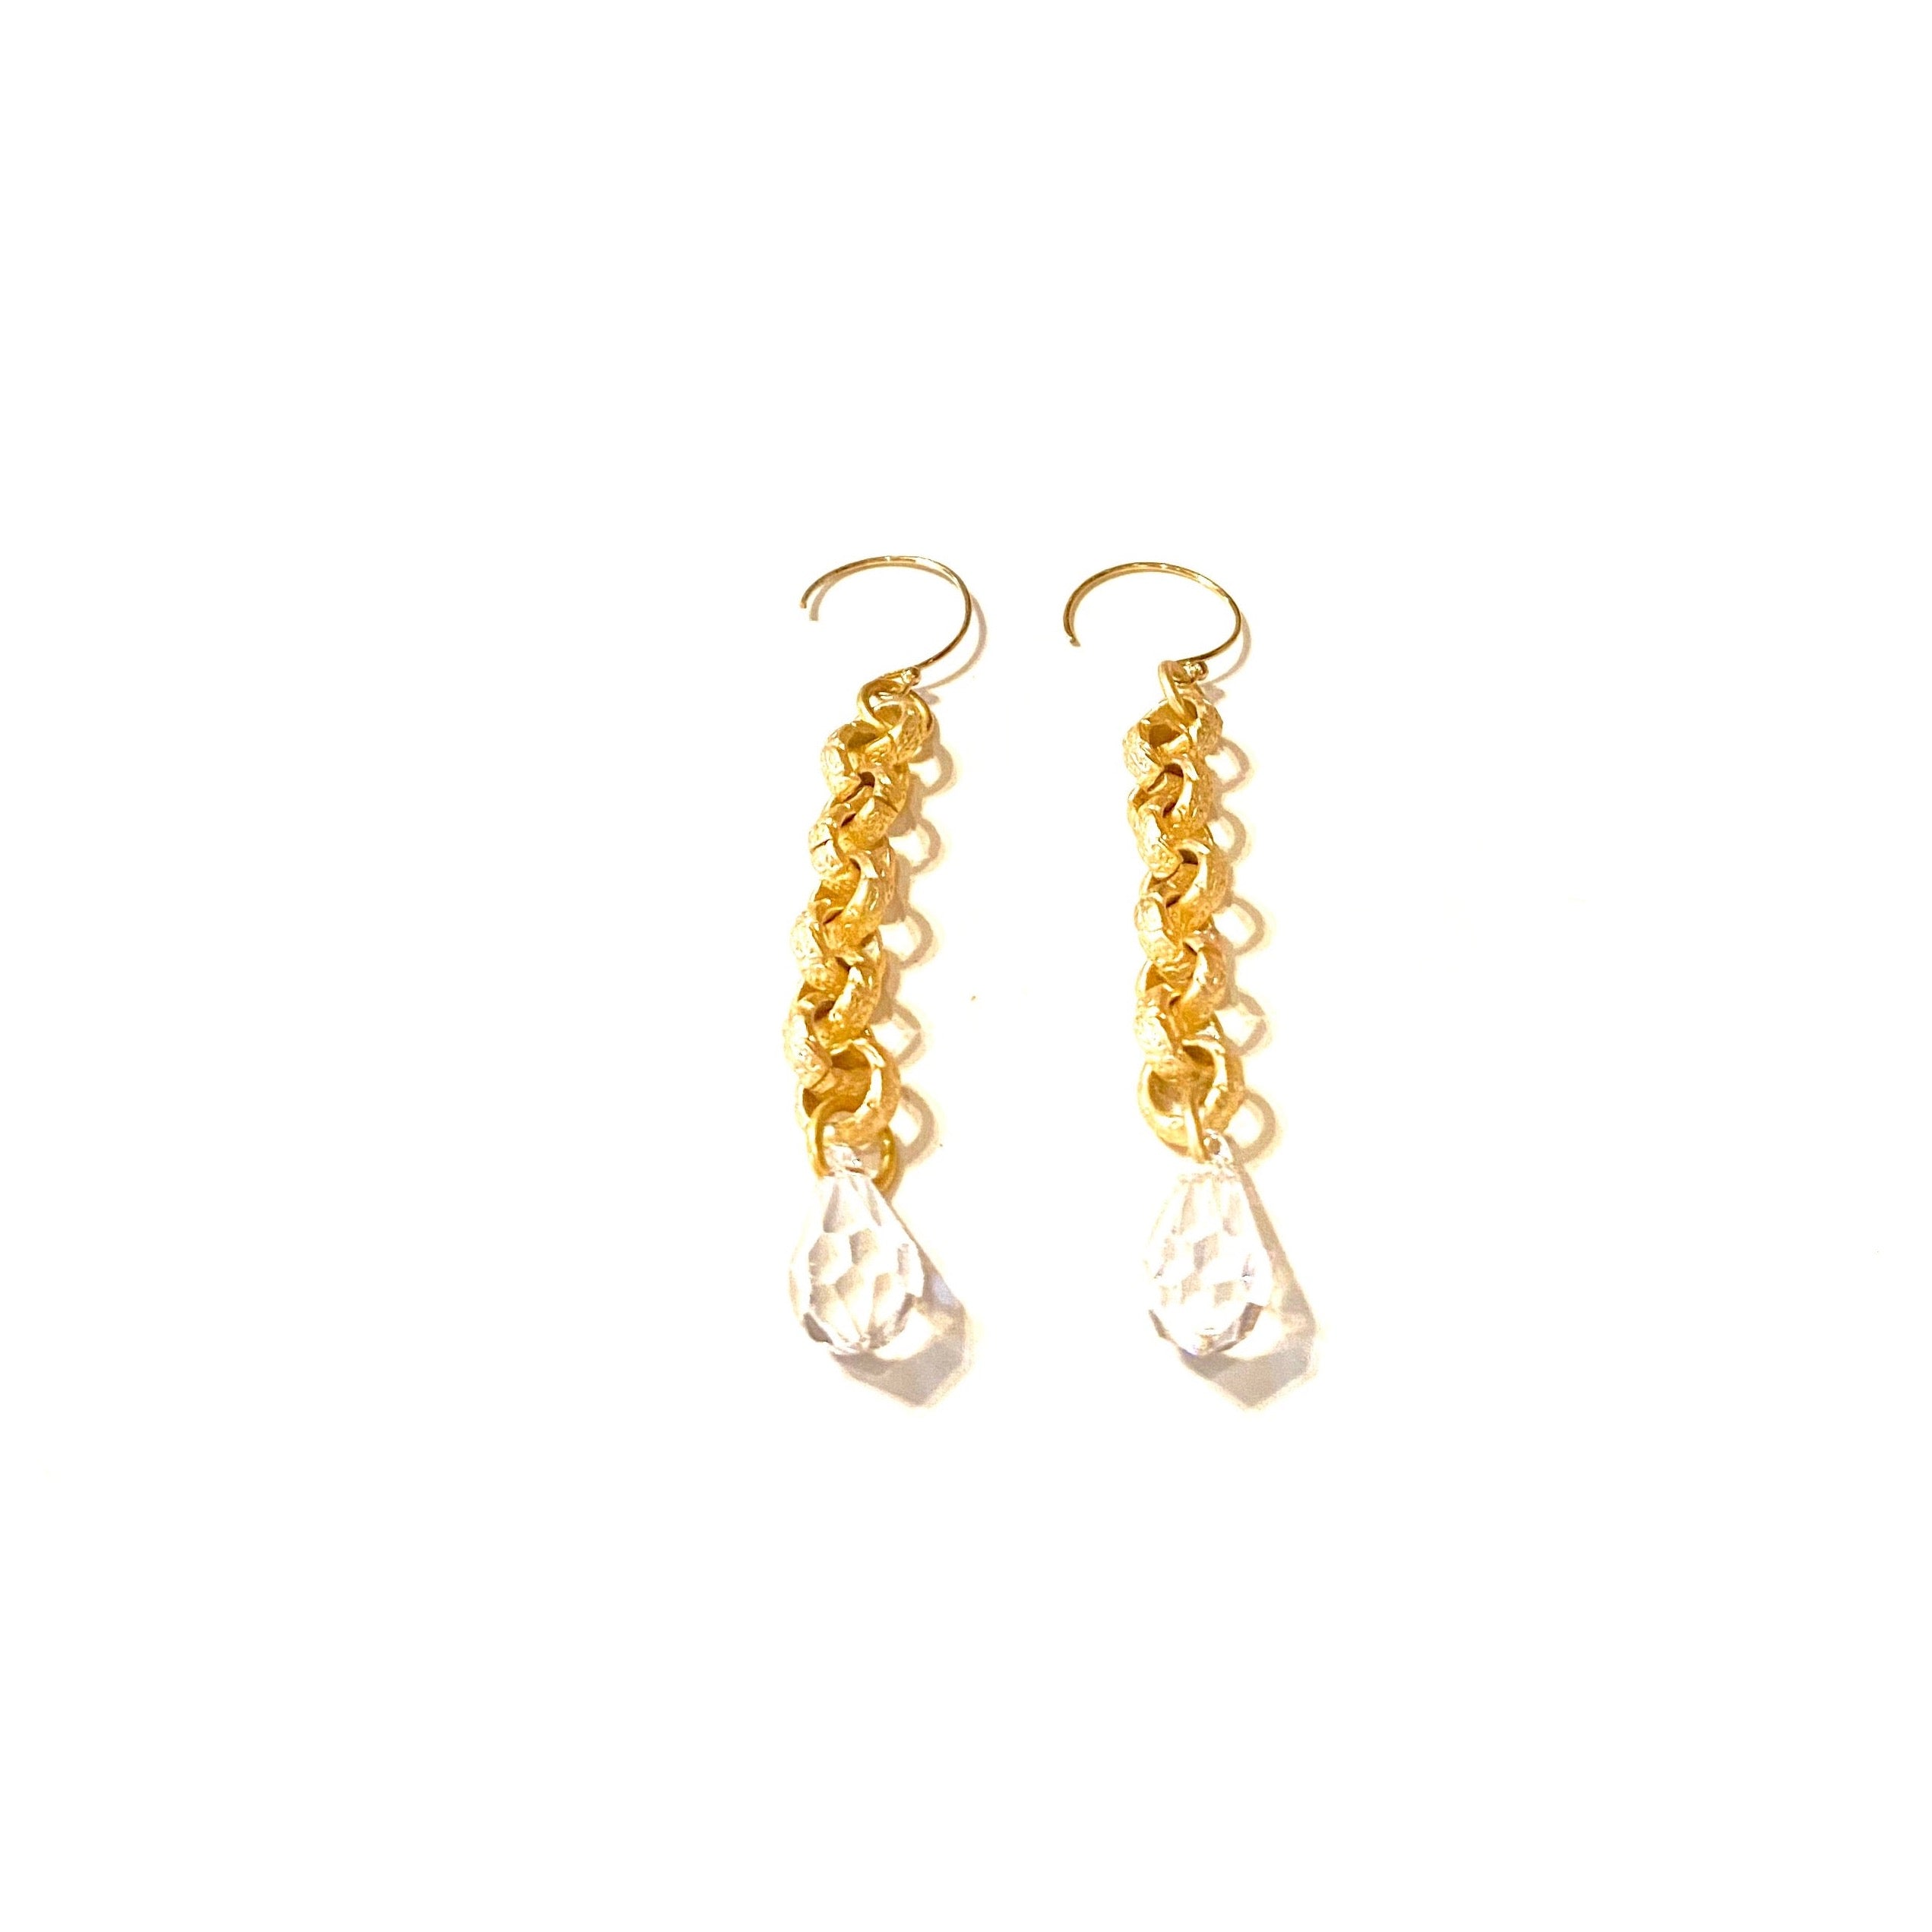 Tallulah - Textured rolo chain earrings with drops